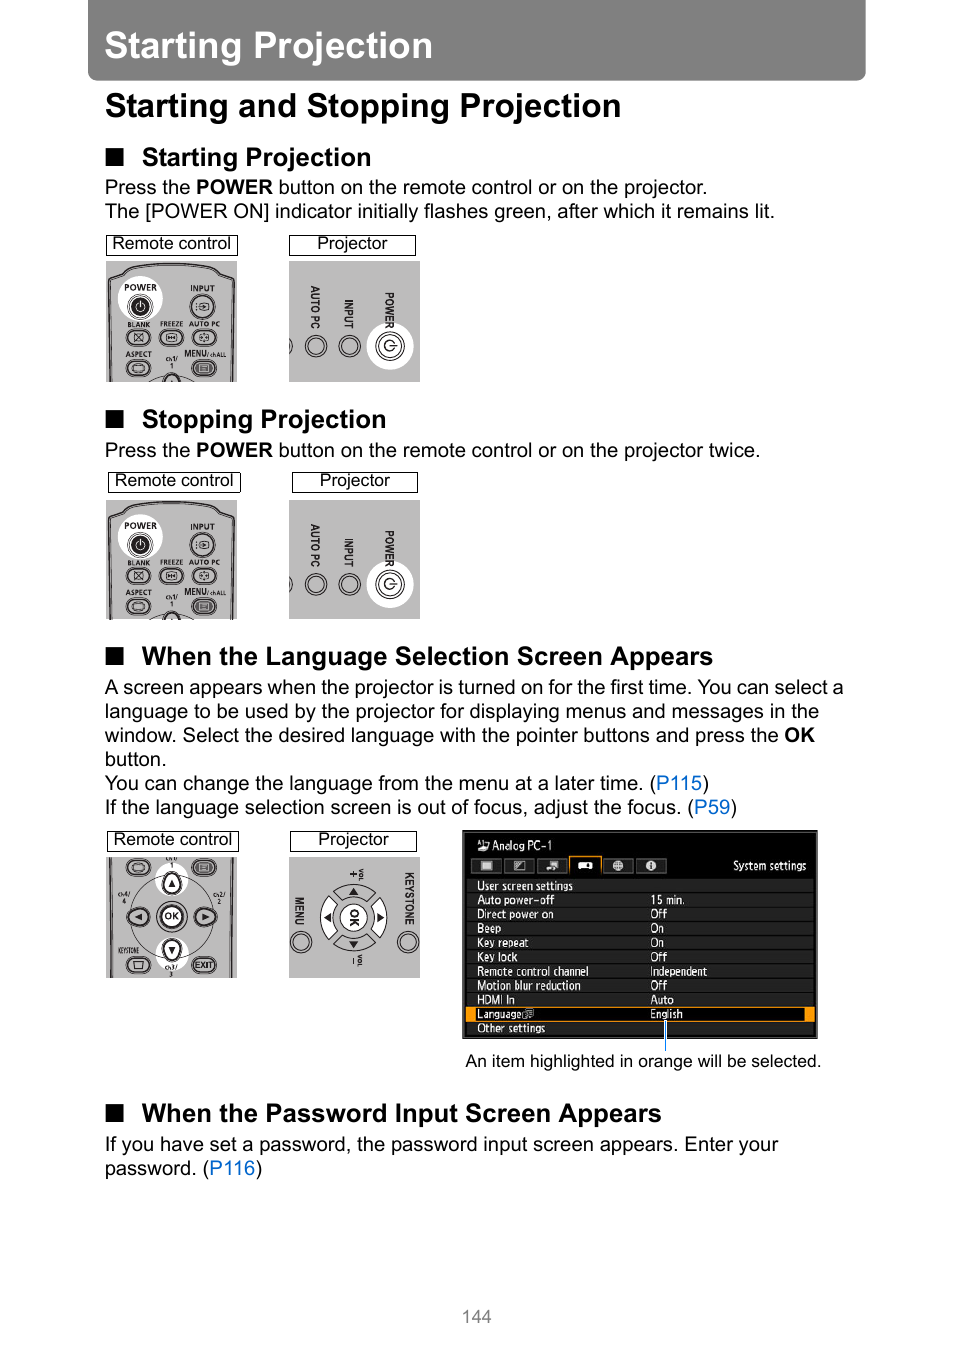 Starting projection, Starting and stopping projection, Stopping projection | When the language selection screen appears, When the password input screen appears, P144 | Canon XEED WUX450 User Manual | Page 144 / 314